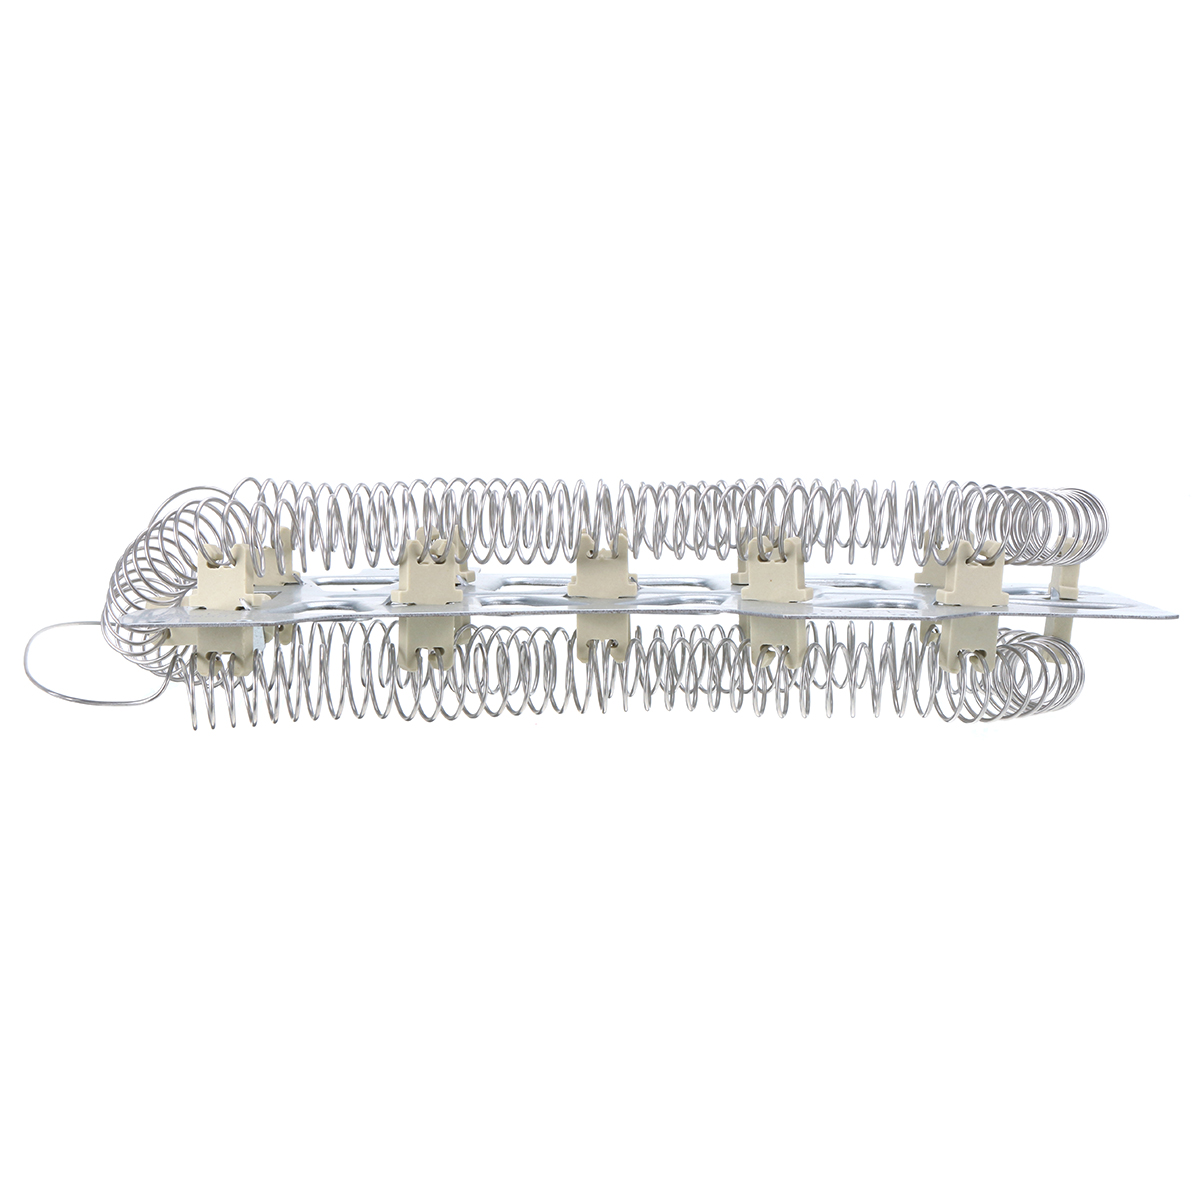 Find Heating Element Replacement for SAMSUNG DC4700019A Clothes Dryers for Sale on Gipsybee.com with cryptocurrencies